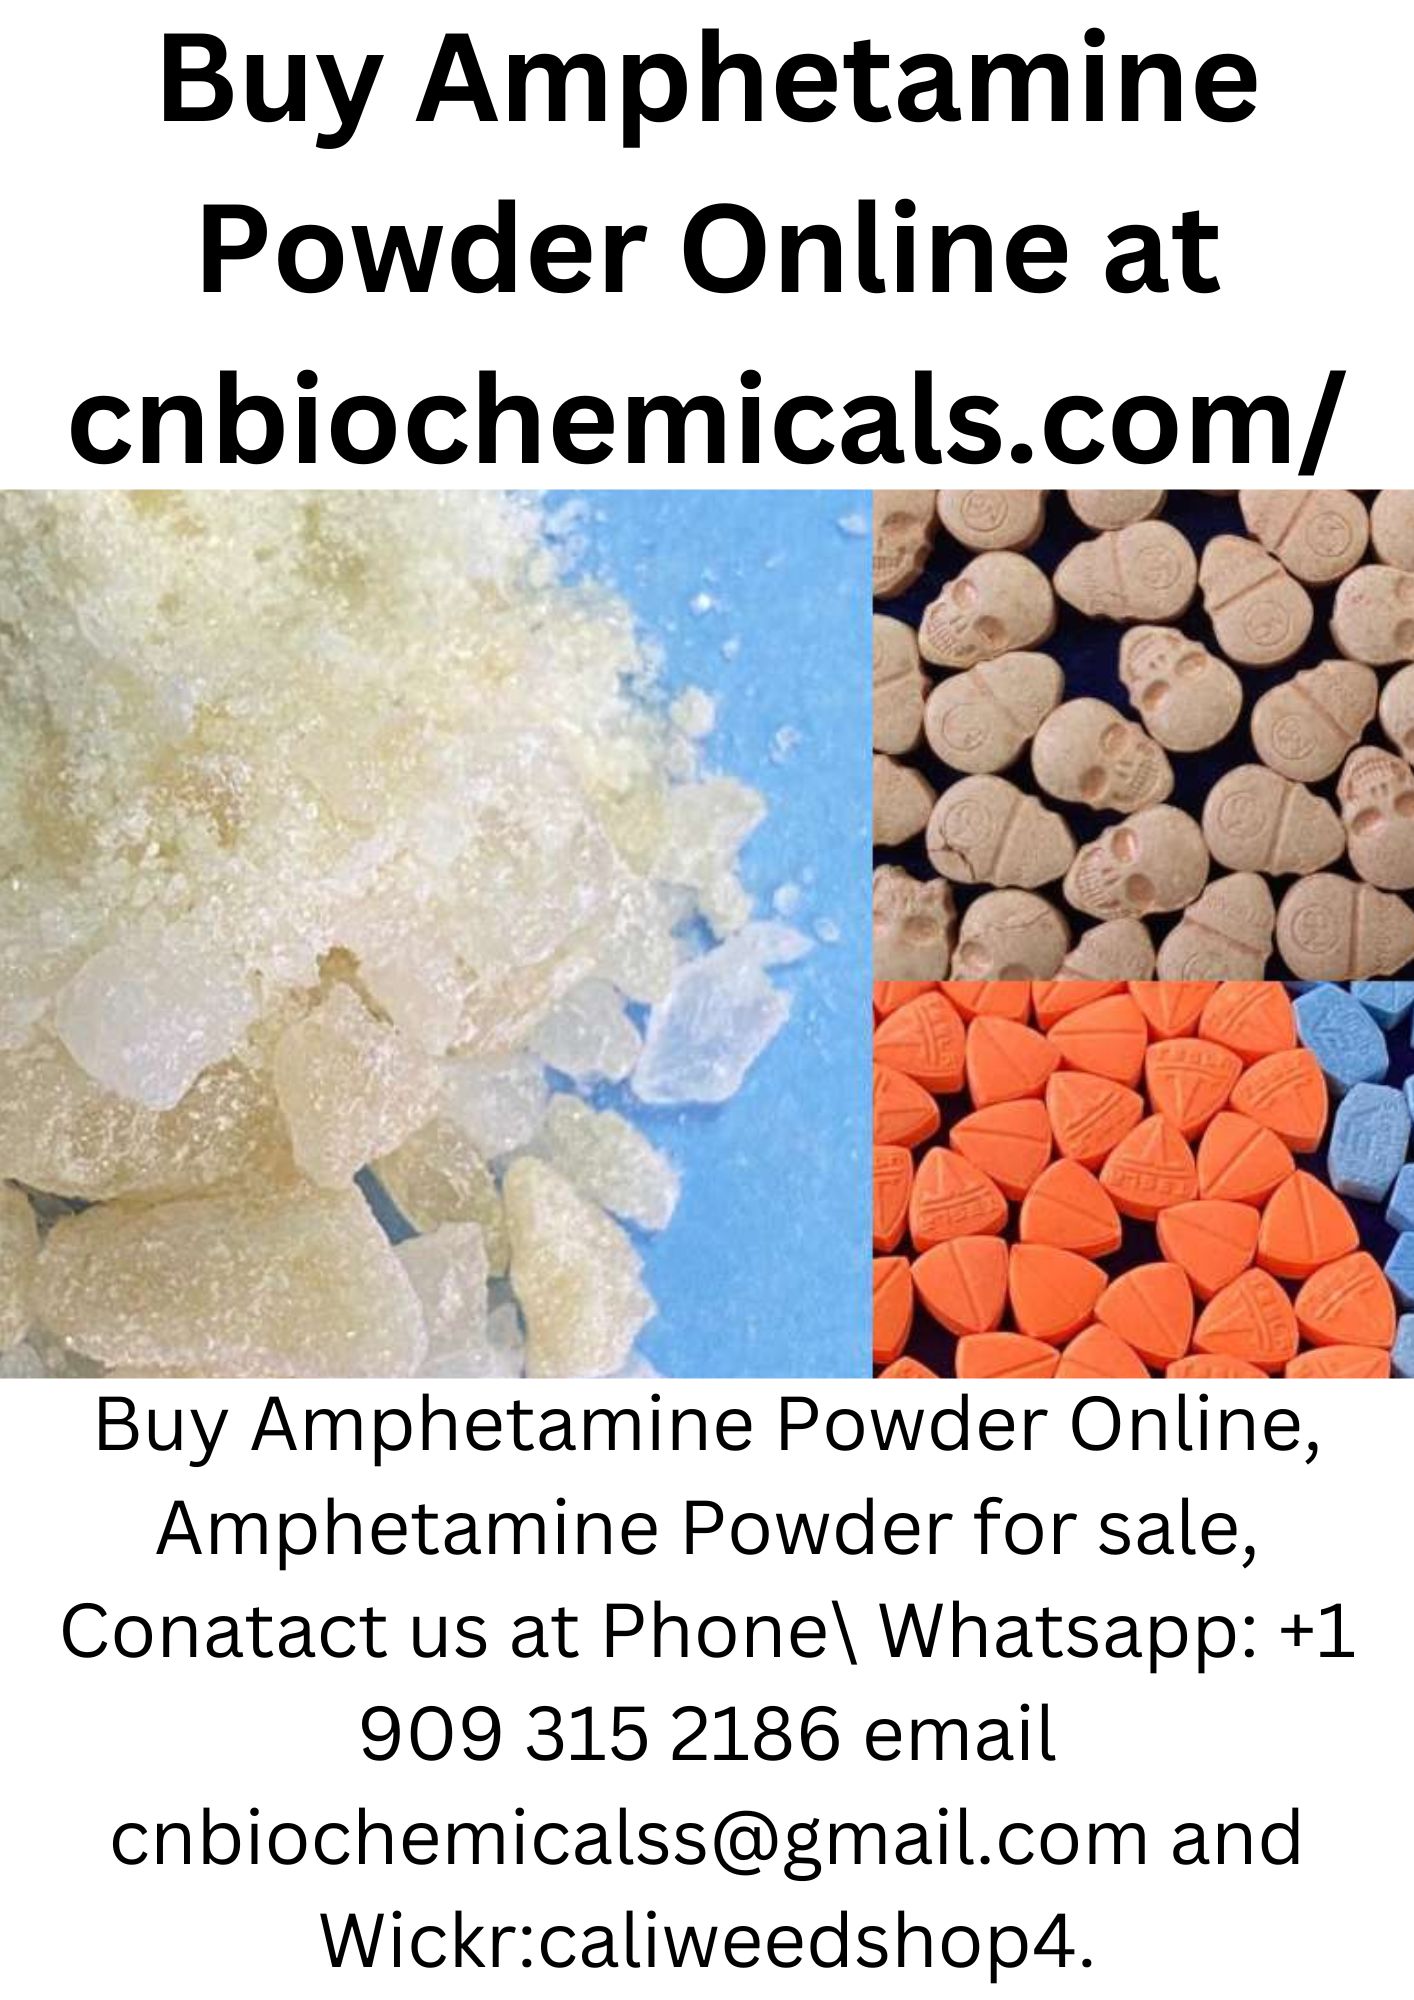 Amphetamine Powder for sale cnbiochemicalscom or Email cn - Maryland - Baltimore ID1547545